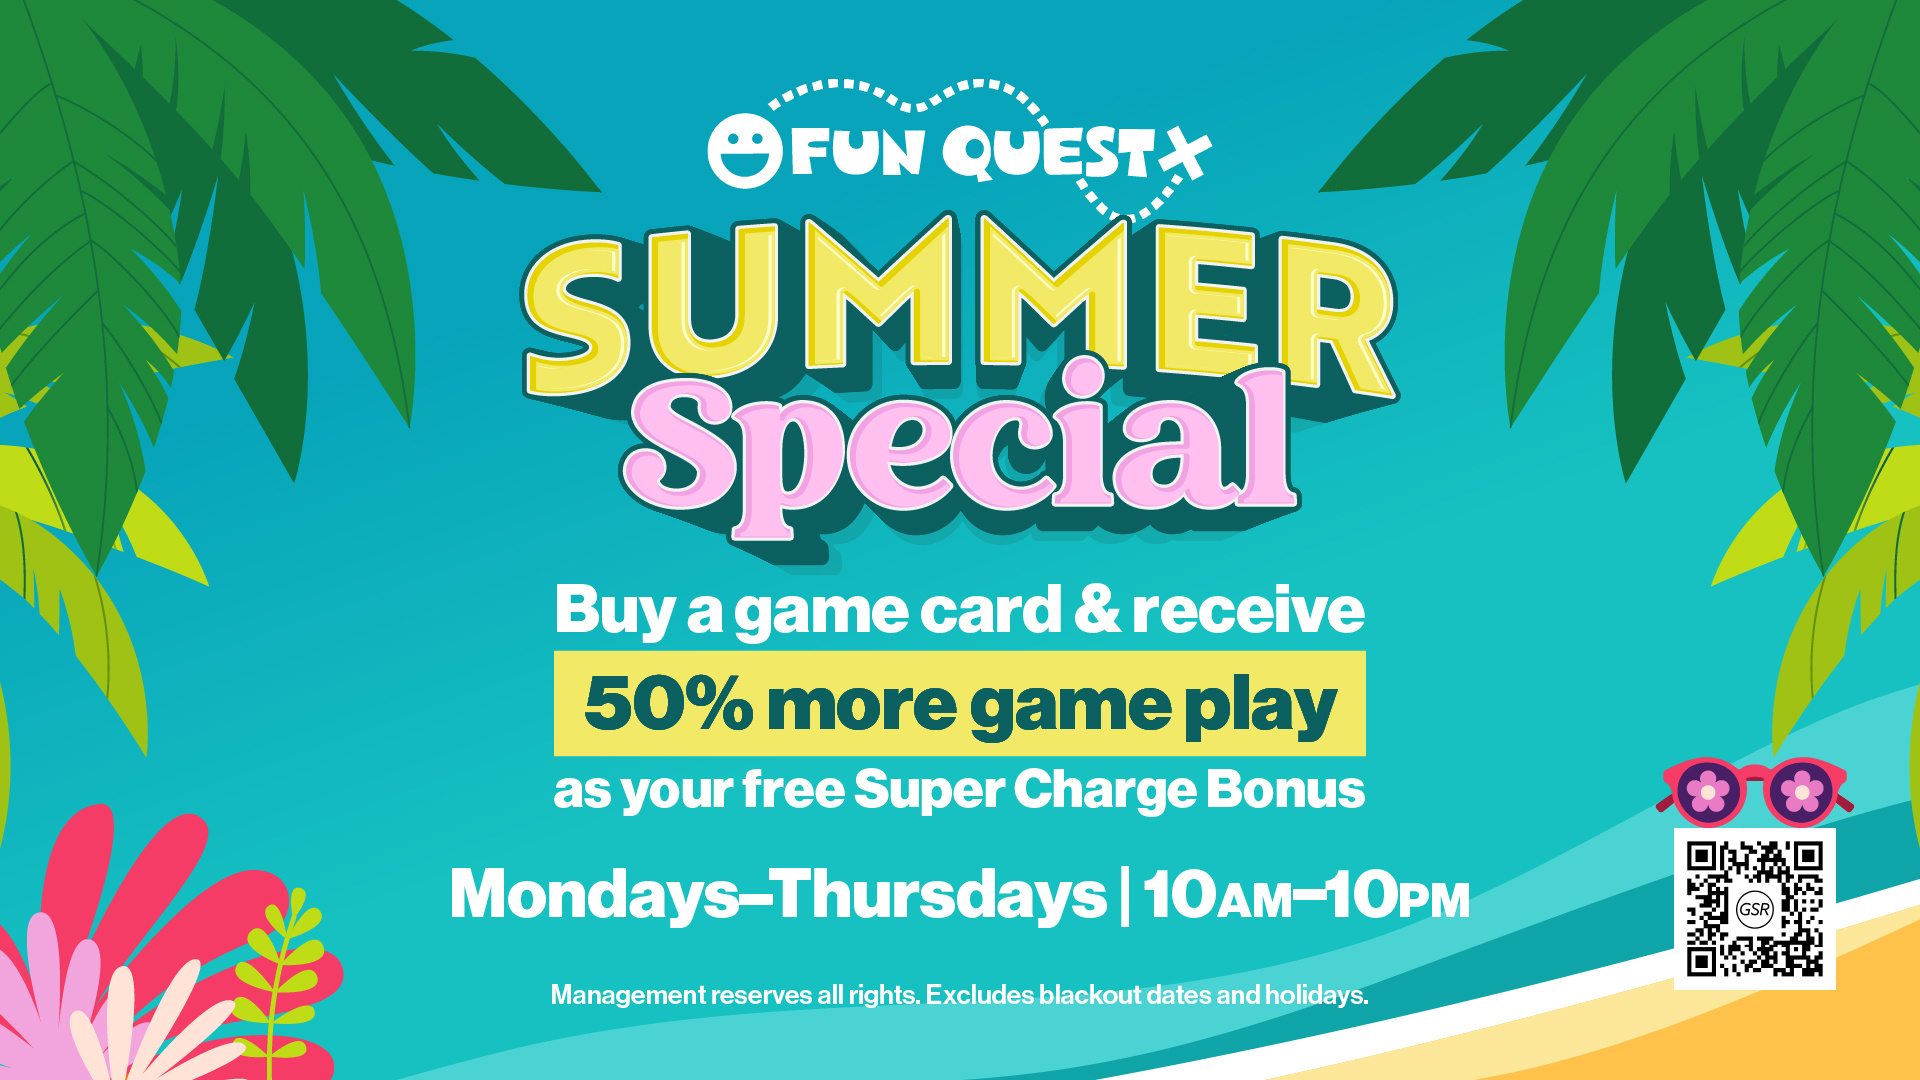 Banner ad for Fun Quest Summer Special 50% more game play